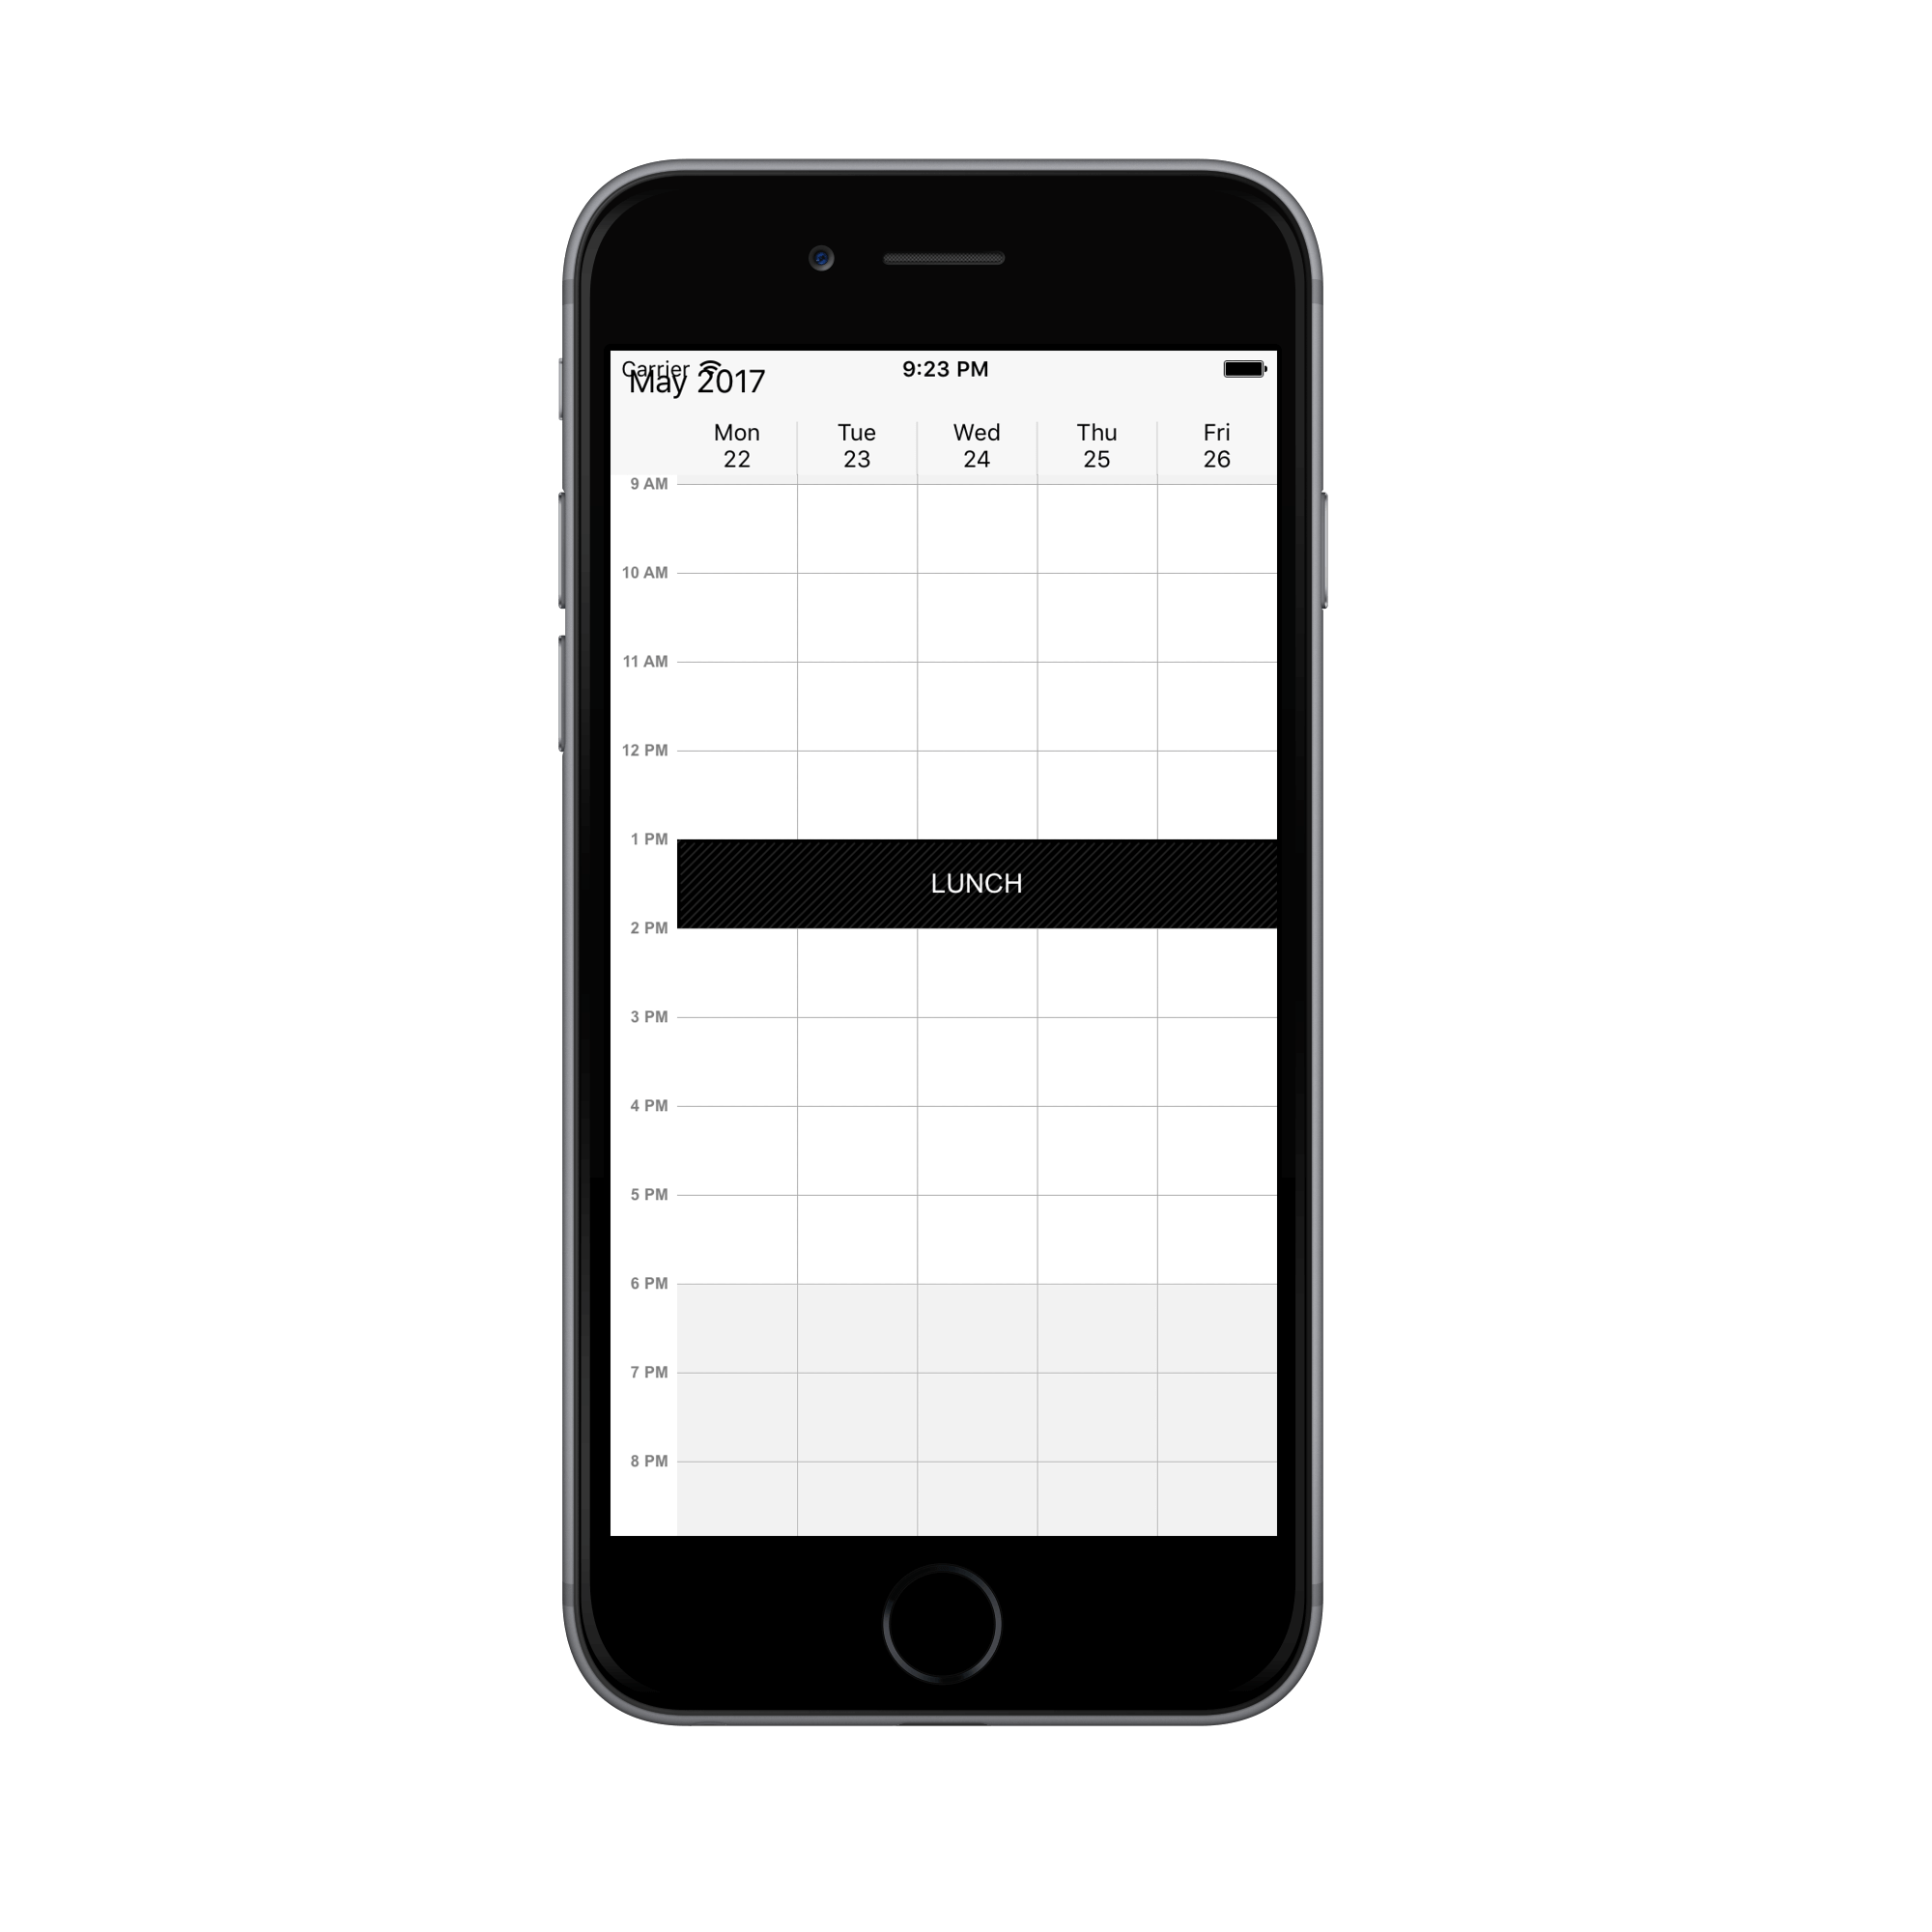 Non accessible block support in schedule work week view for Xamarin.iOS